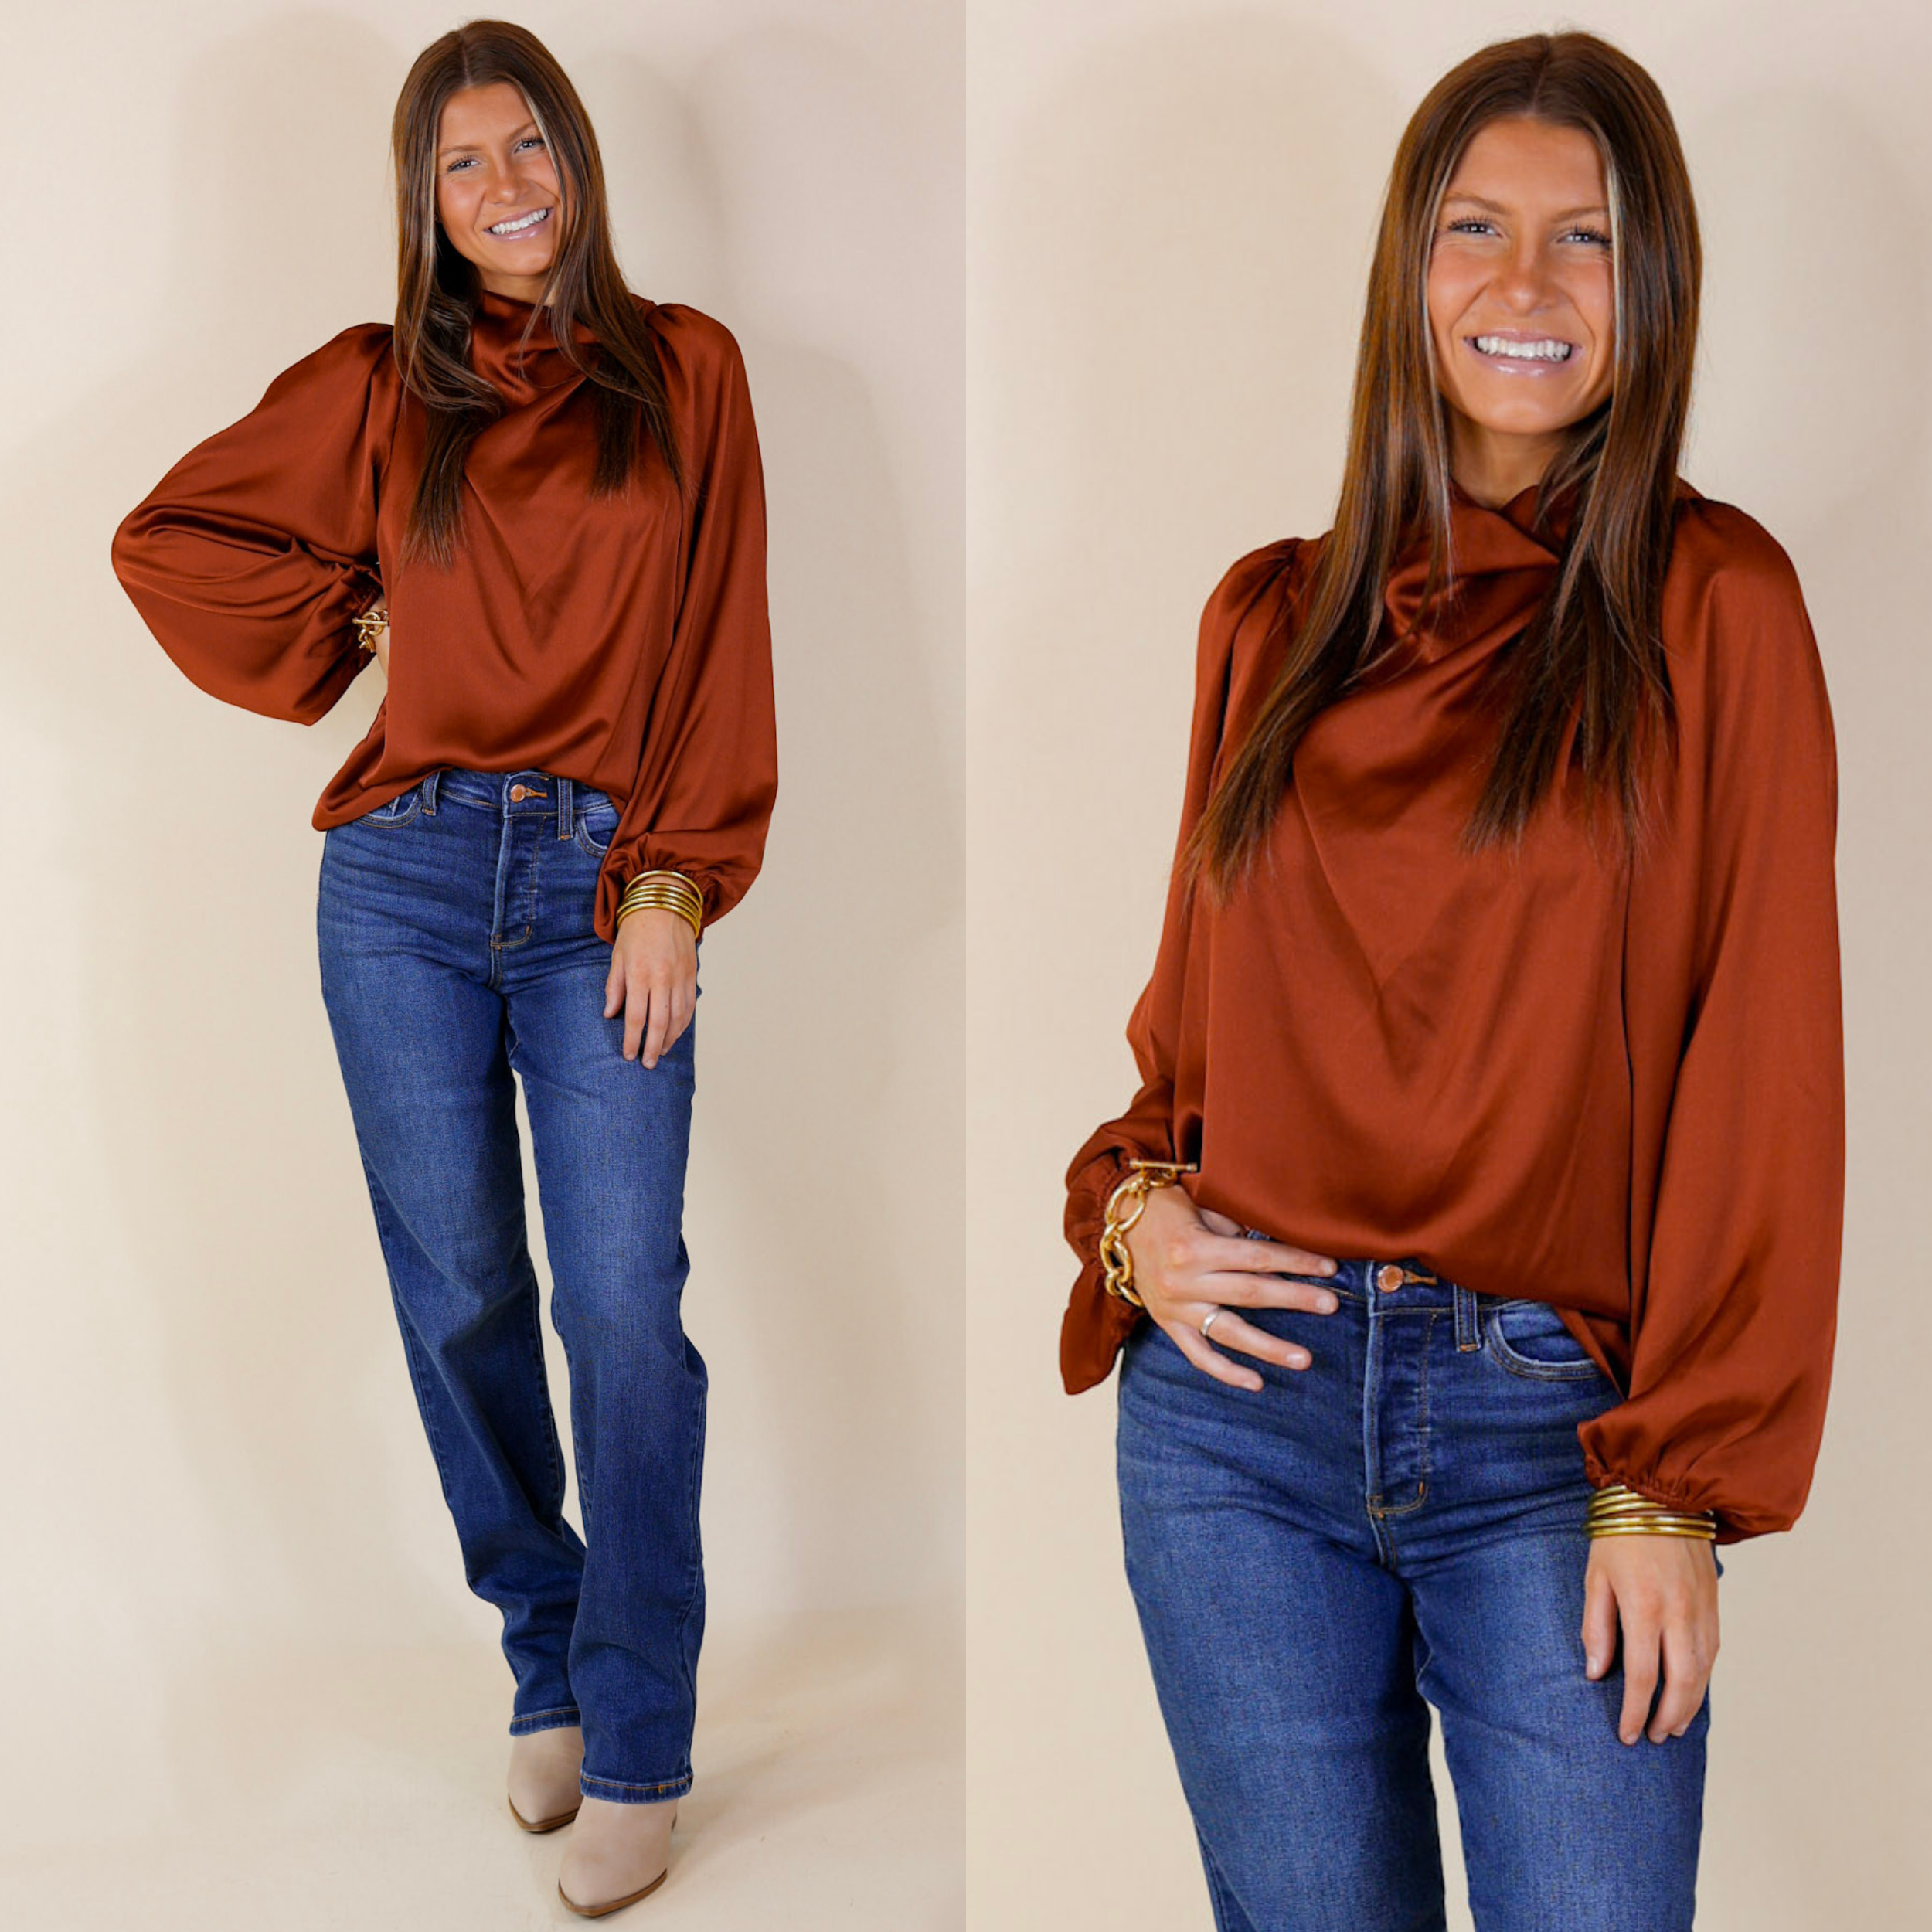 Model is wearing a rust orange long sleeve top with a cowl neckline. Model has this flowy top paired with denim jeans, ivory booties, and gold jewelry.